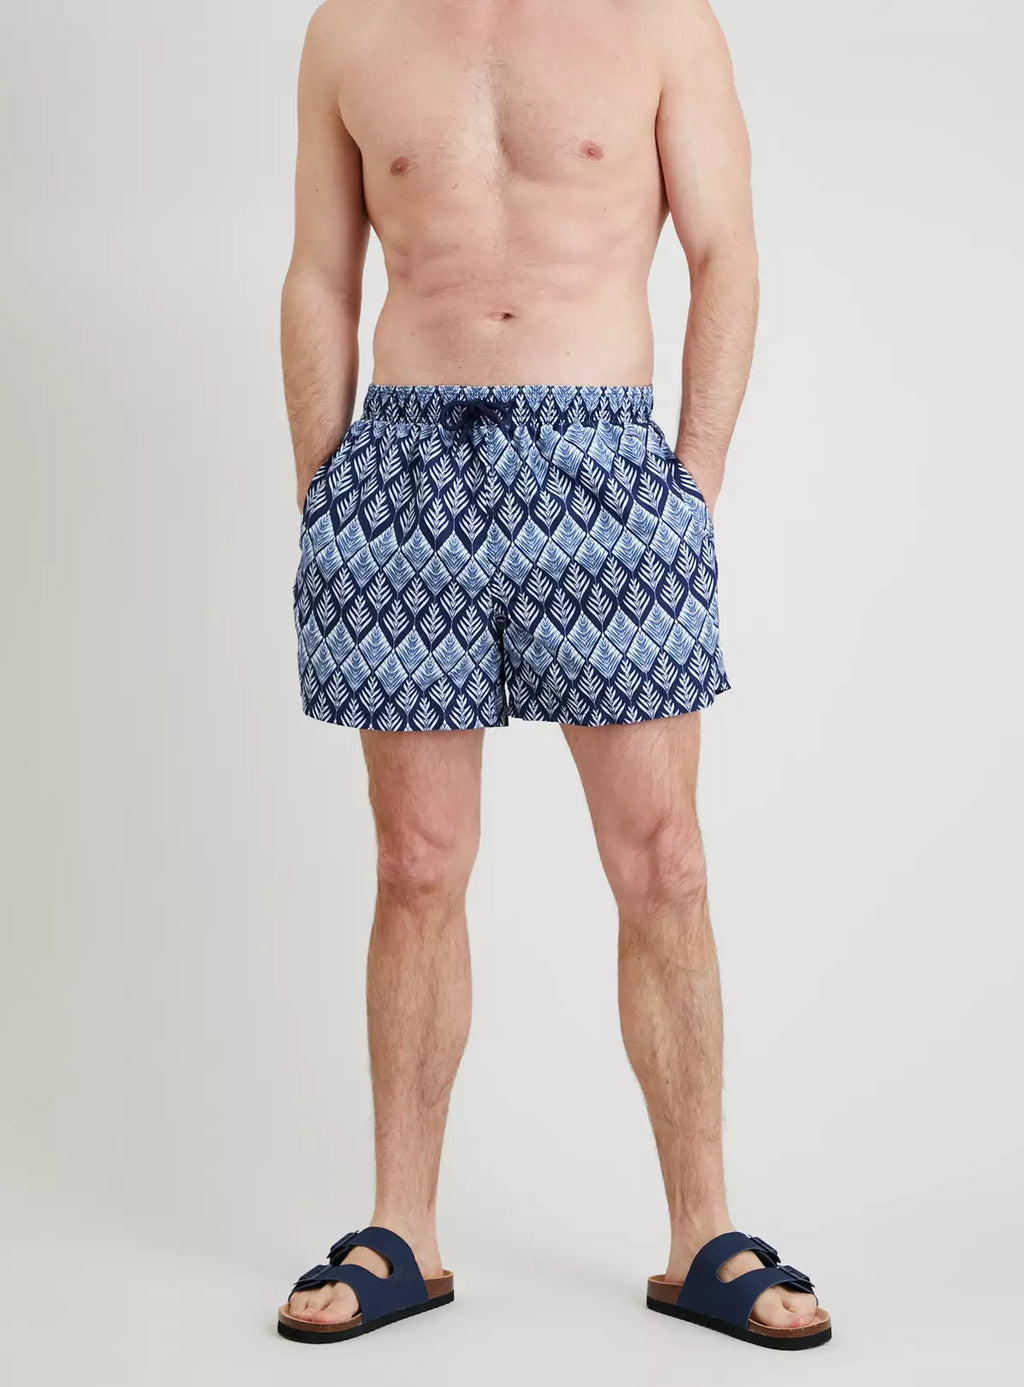 swimming shorts for men - the beach company online swimsuit shop india